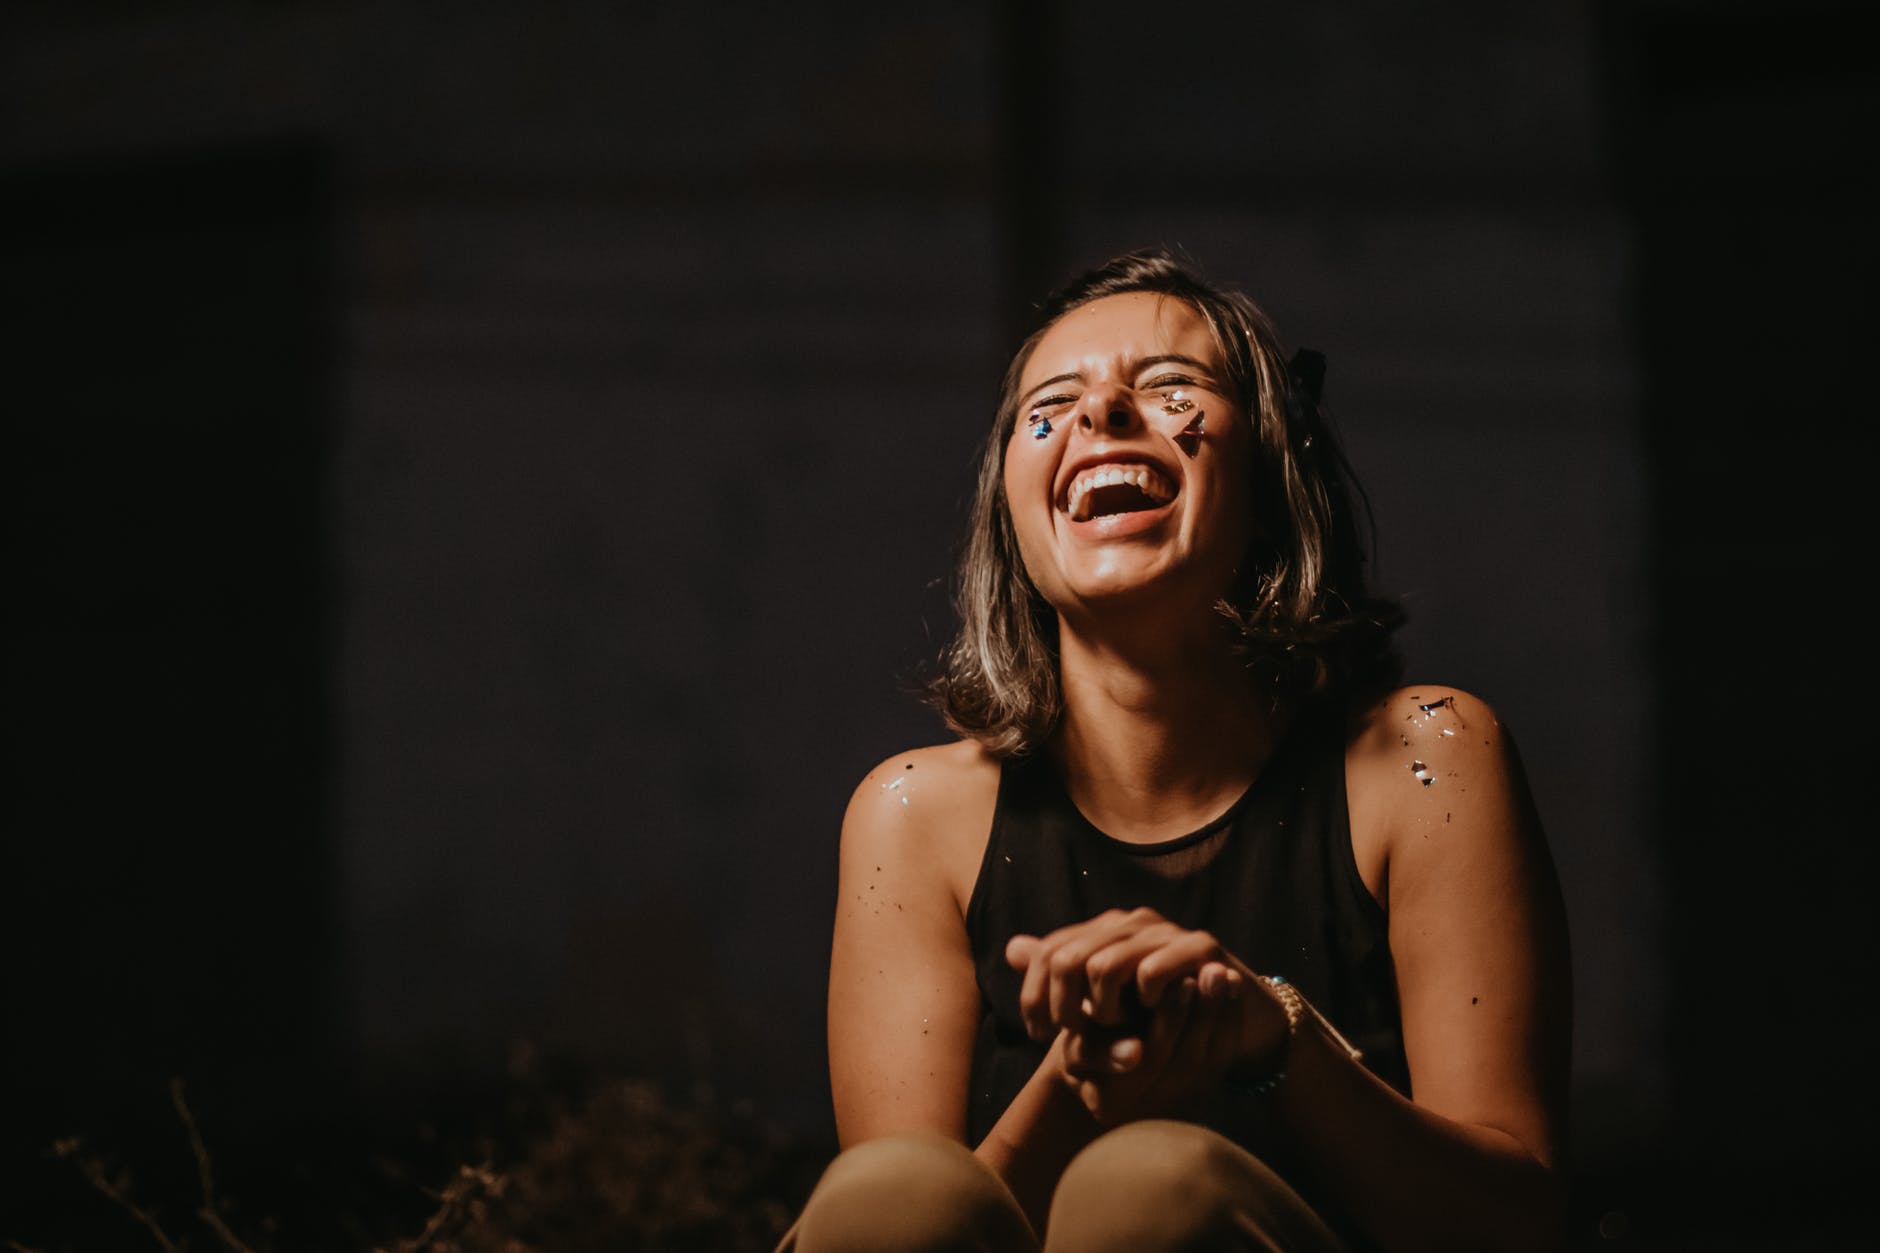 photo of a woman laughing wearing black top